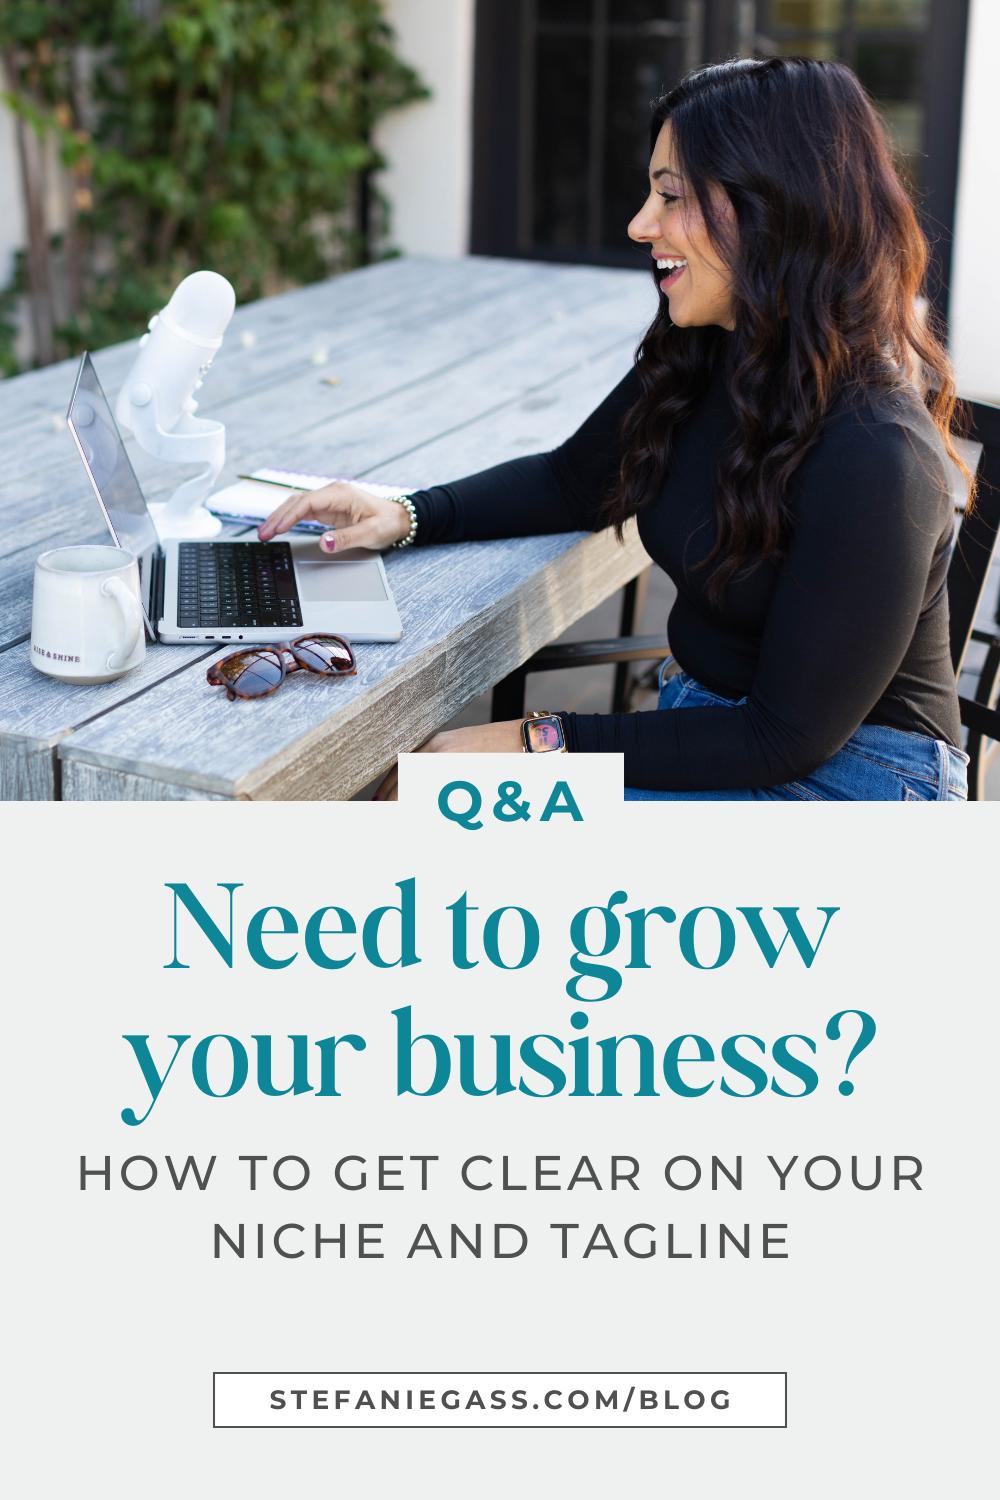 brown haired smiling woman sitting at a table with her laptop, podcast microphone, and sunglasses Text reads: Q&A Need to grow your business?  How to get clear on your niche and tagline, Stefanie Gass